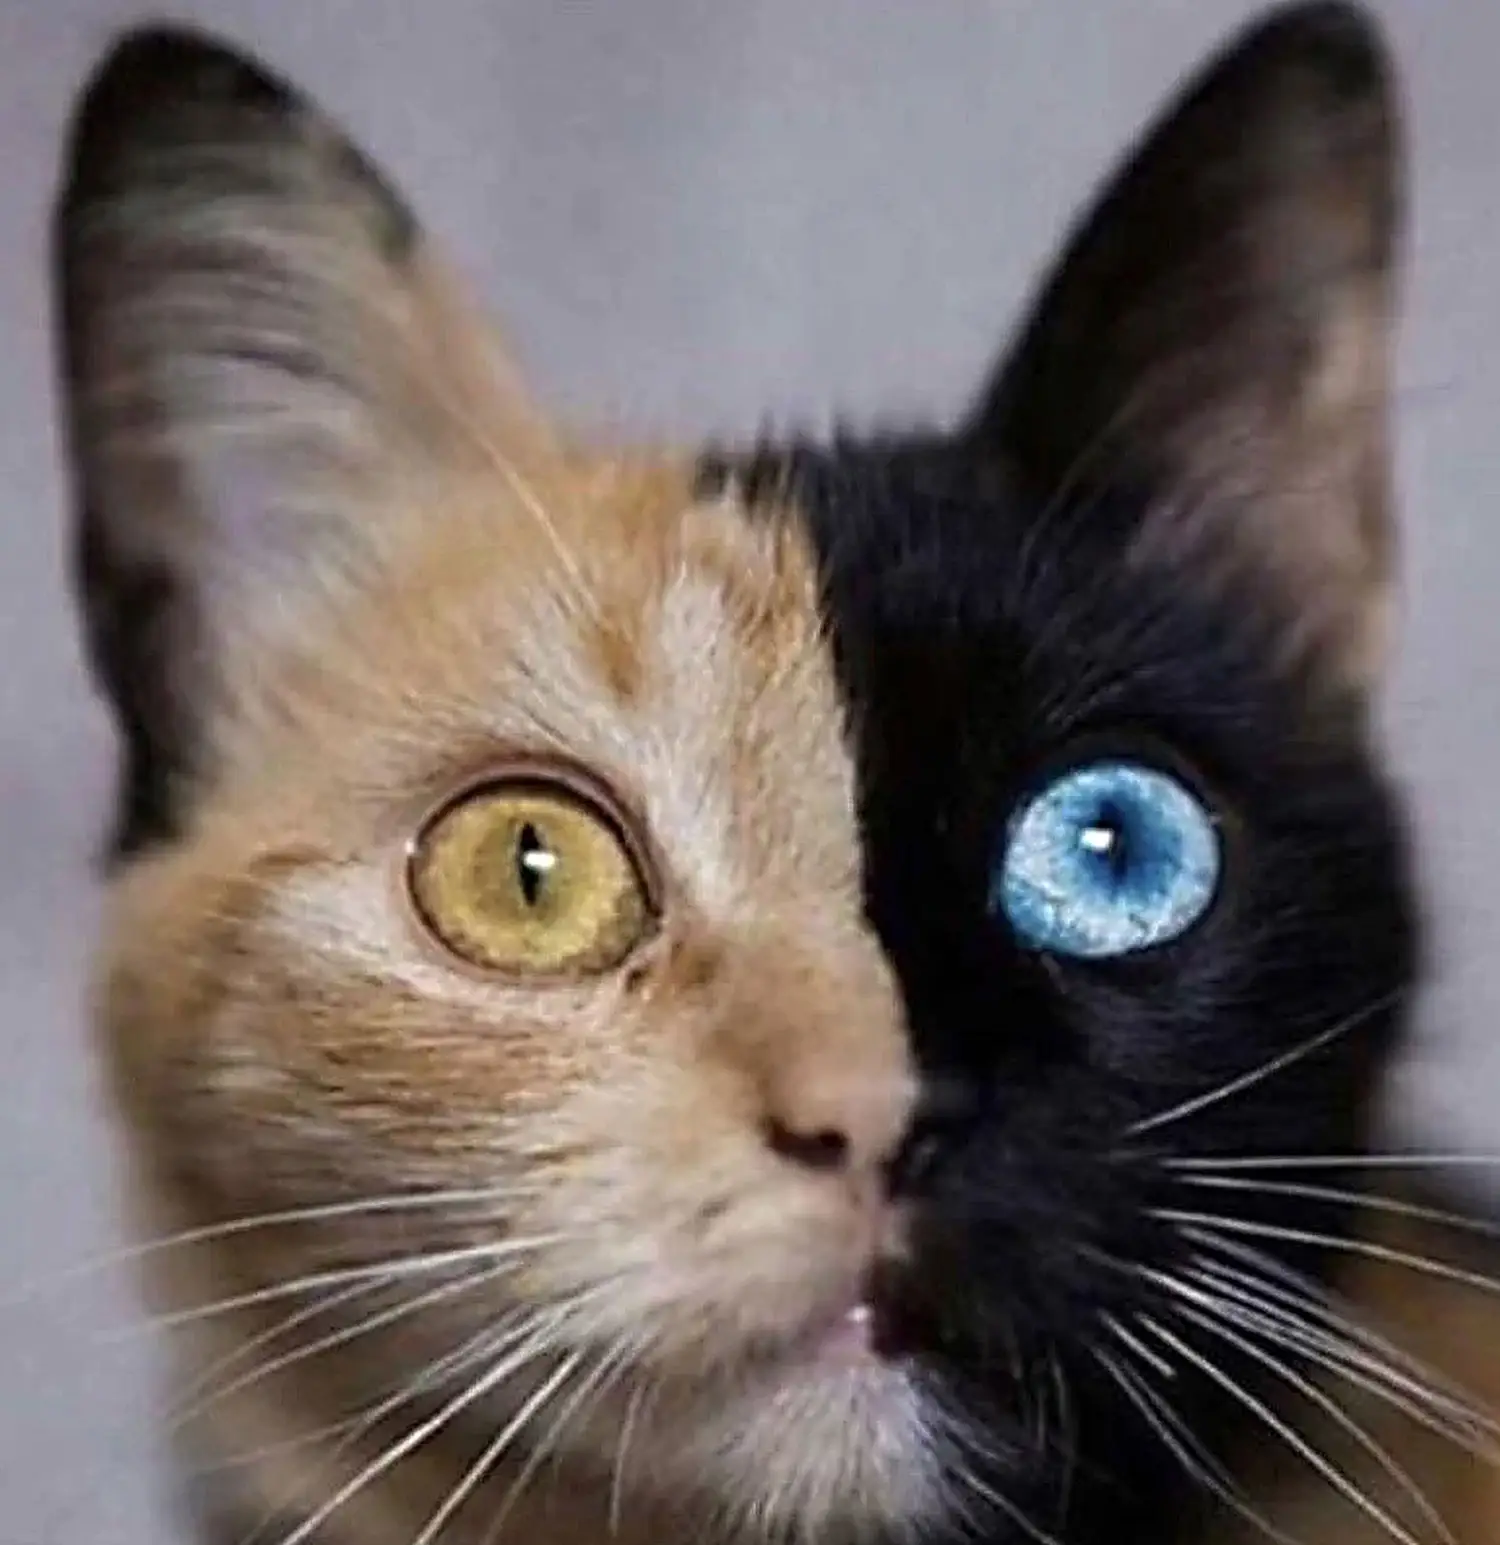 A chimeric cat whose right side is orange with an orange eye, and its left side is black with a striking blue eye. The two colors are split as if by a single line running perfectly down the middle.